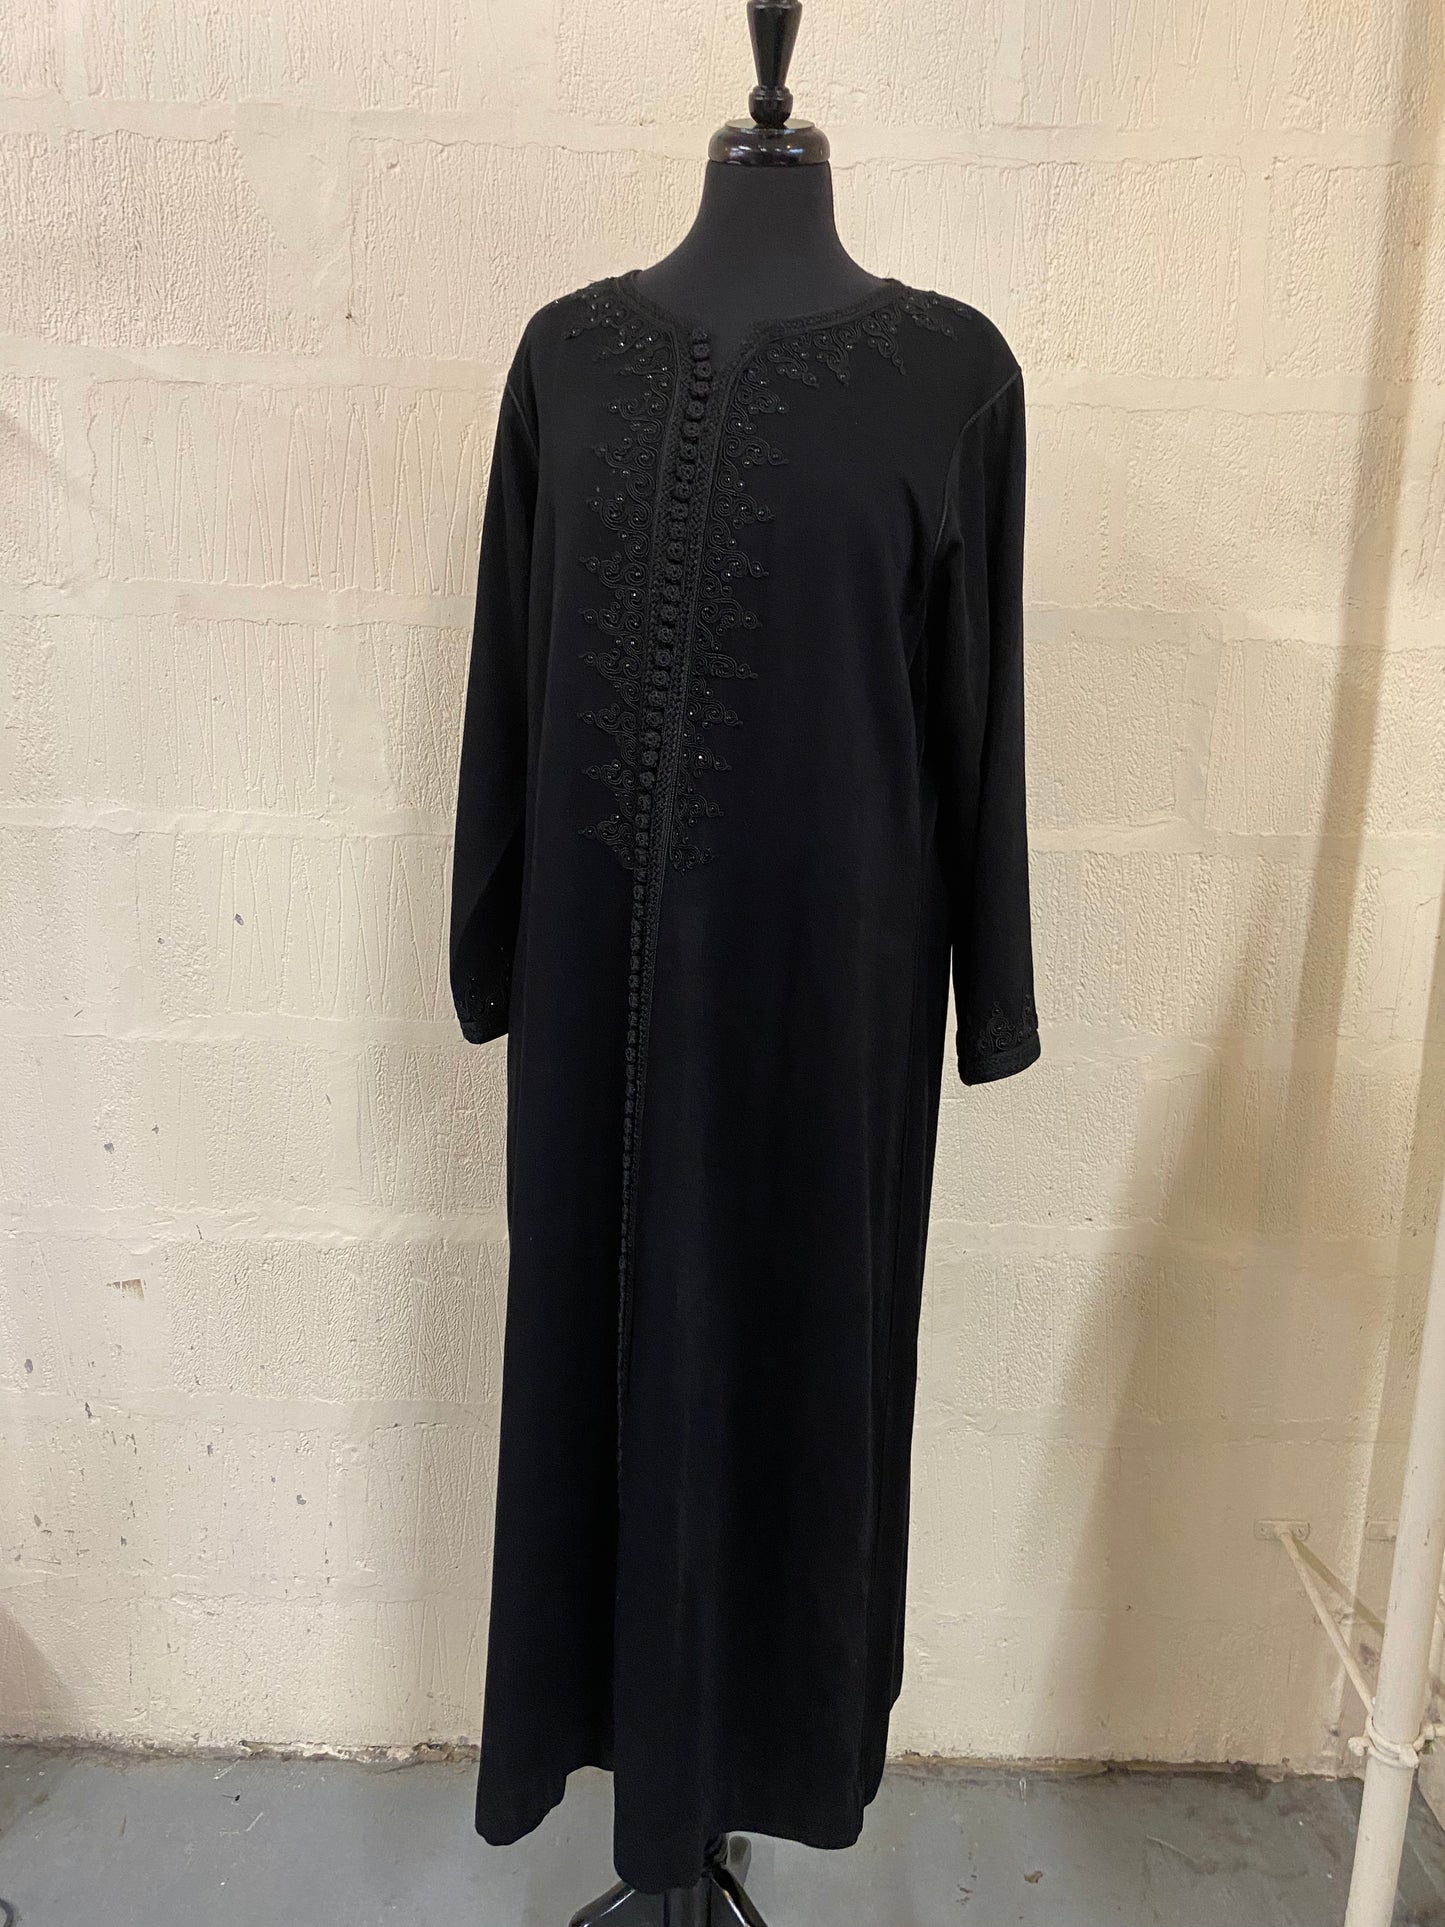 Vintage Black Djellaba Robe with embroidery and bead embellishment - one size